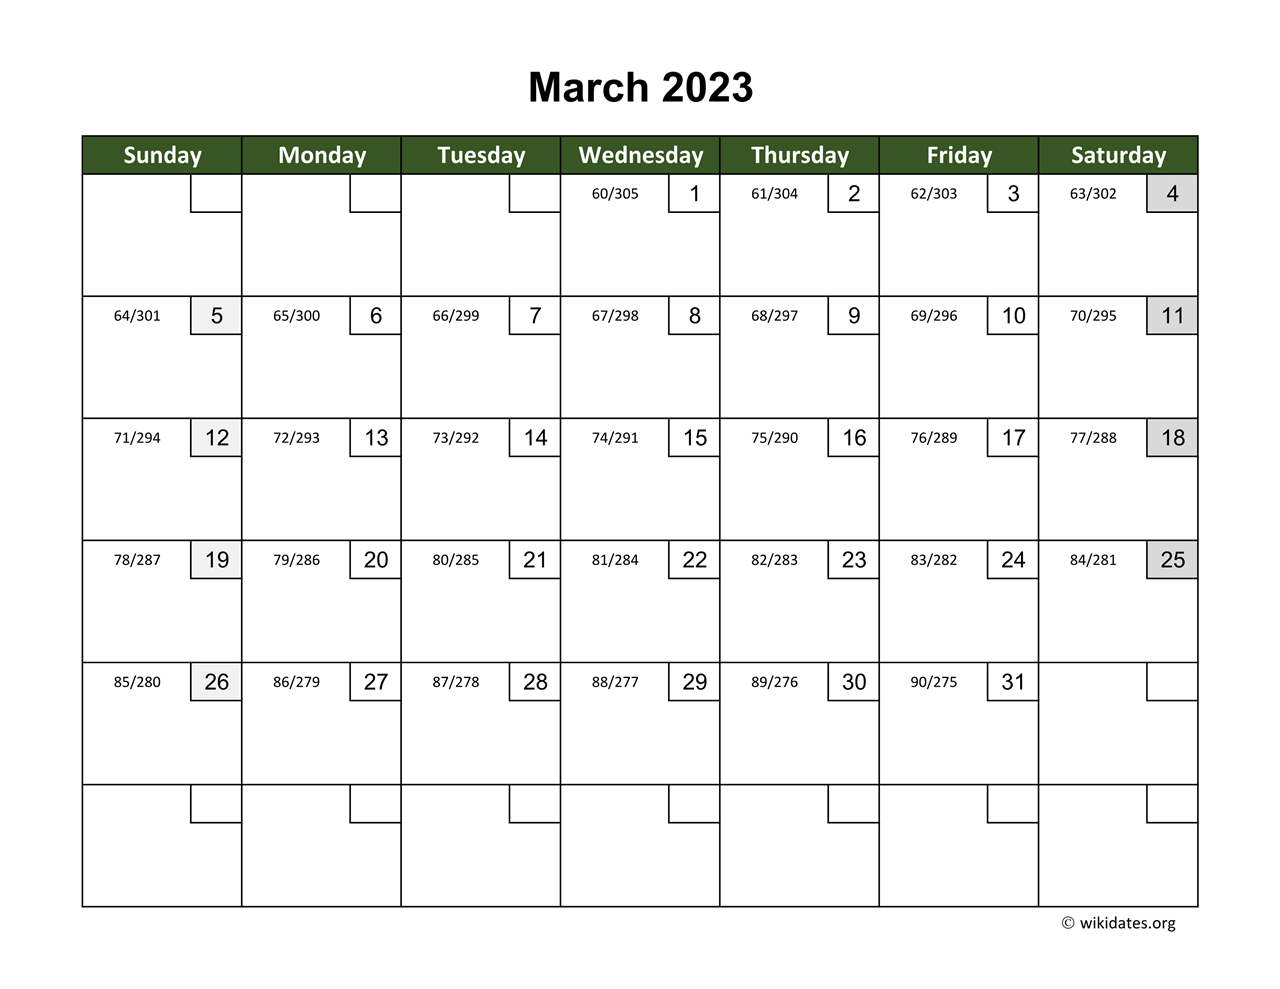 march-2023-calendar-with-day-numbers-wikidates